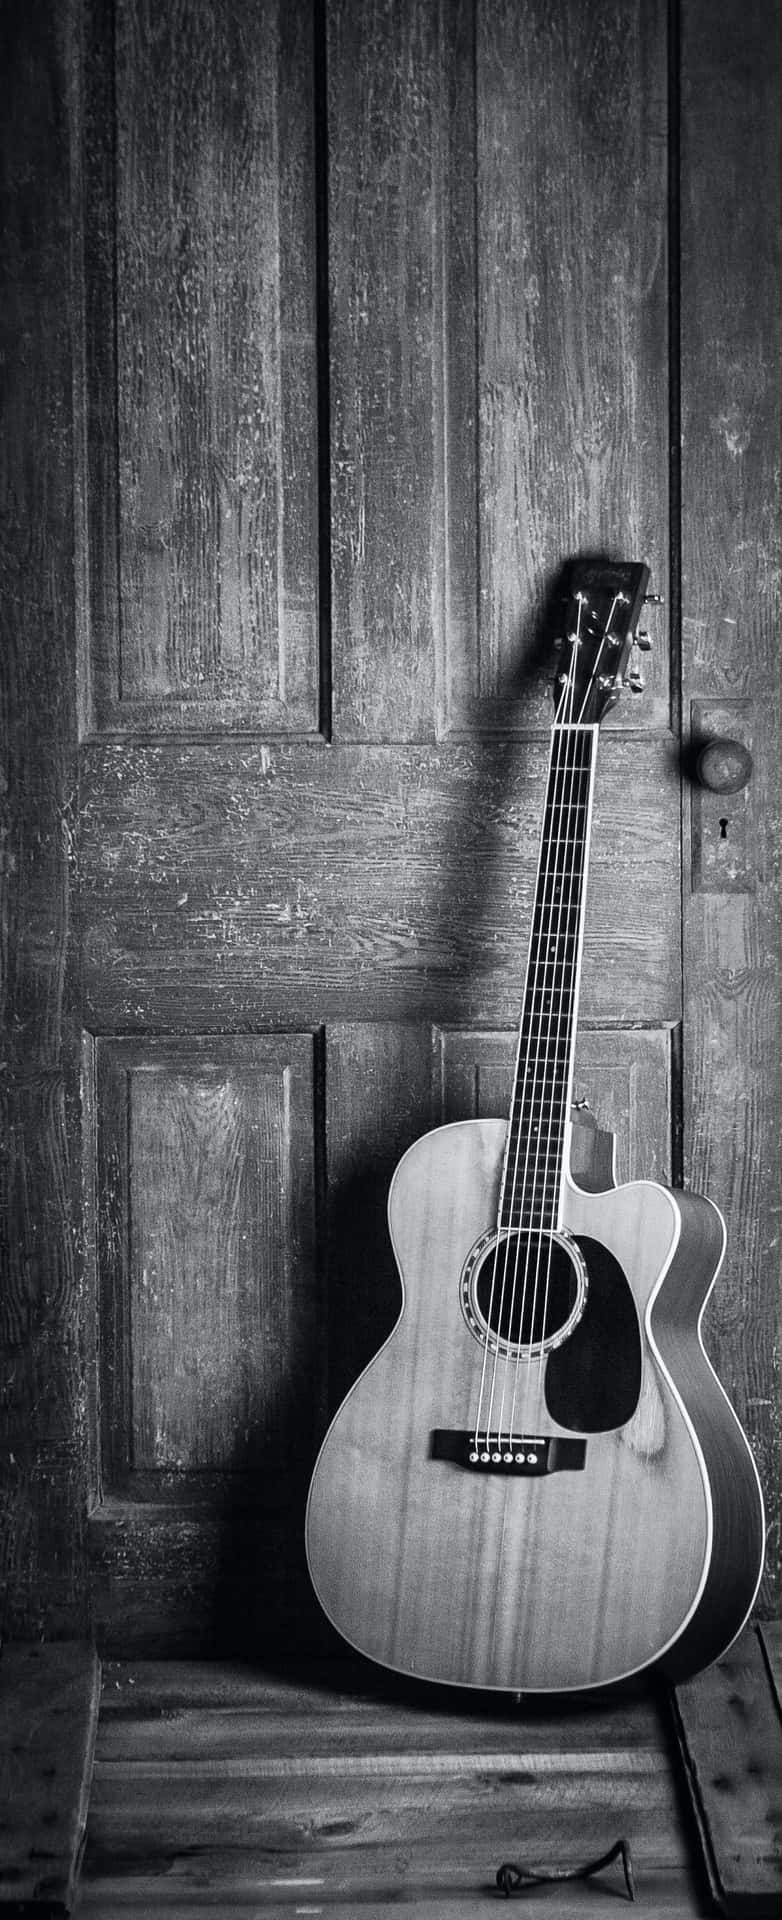 A Beautiful Acoustic Guitar, Perfect For Getting Creative! Background